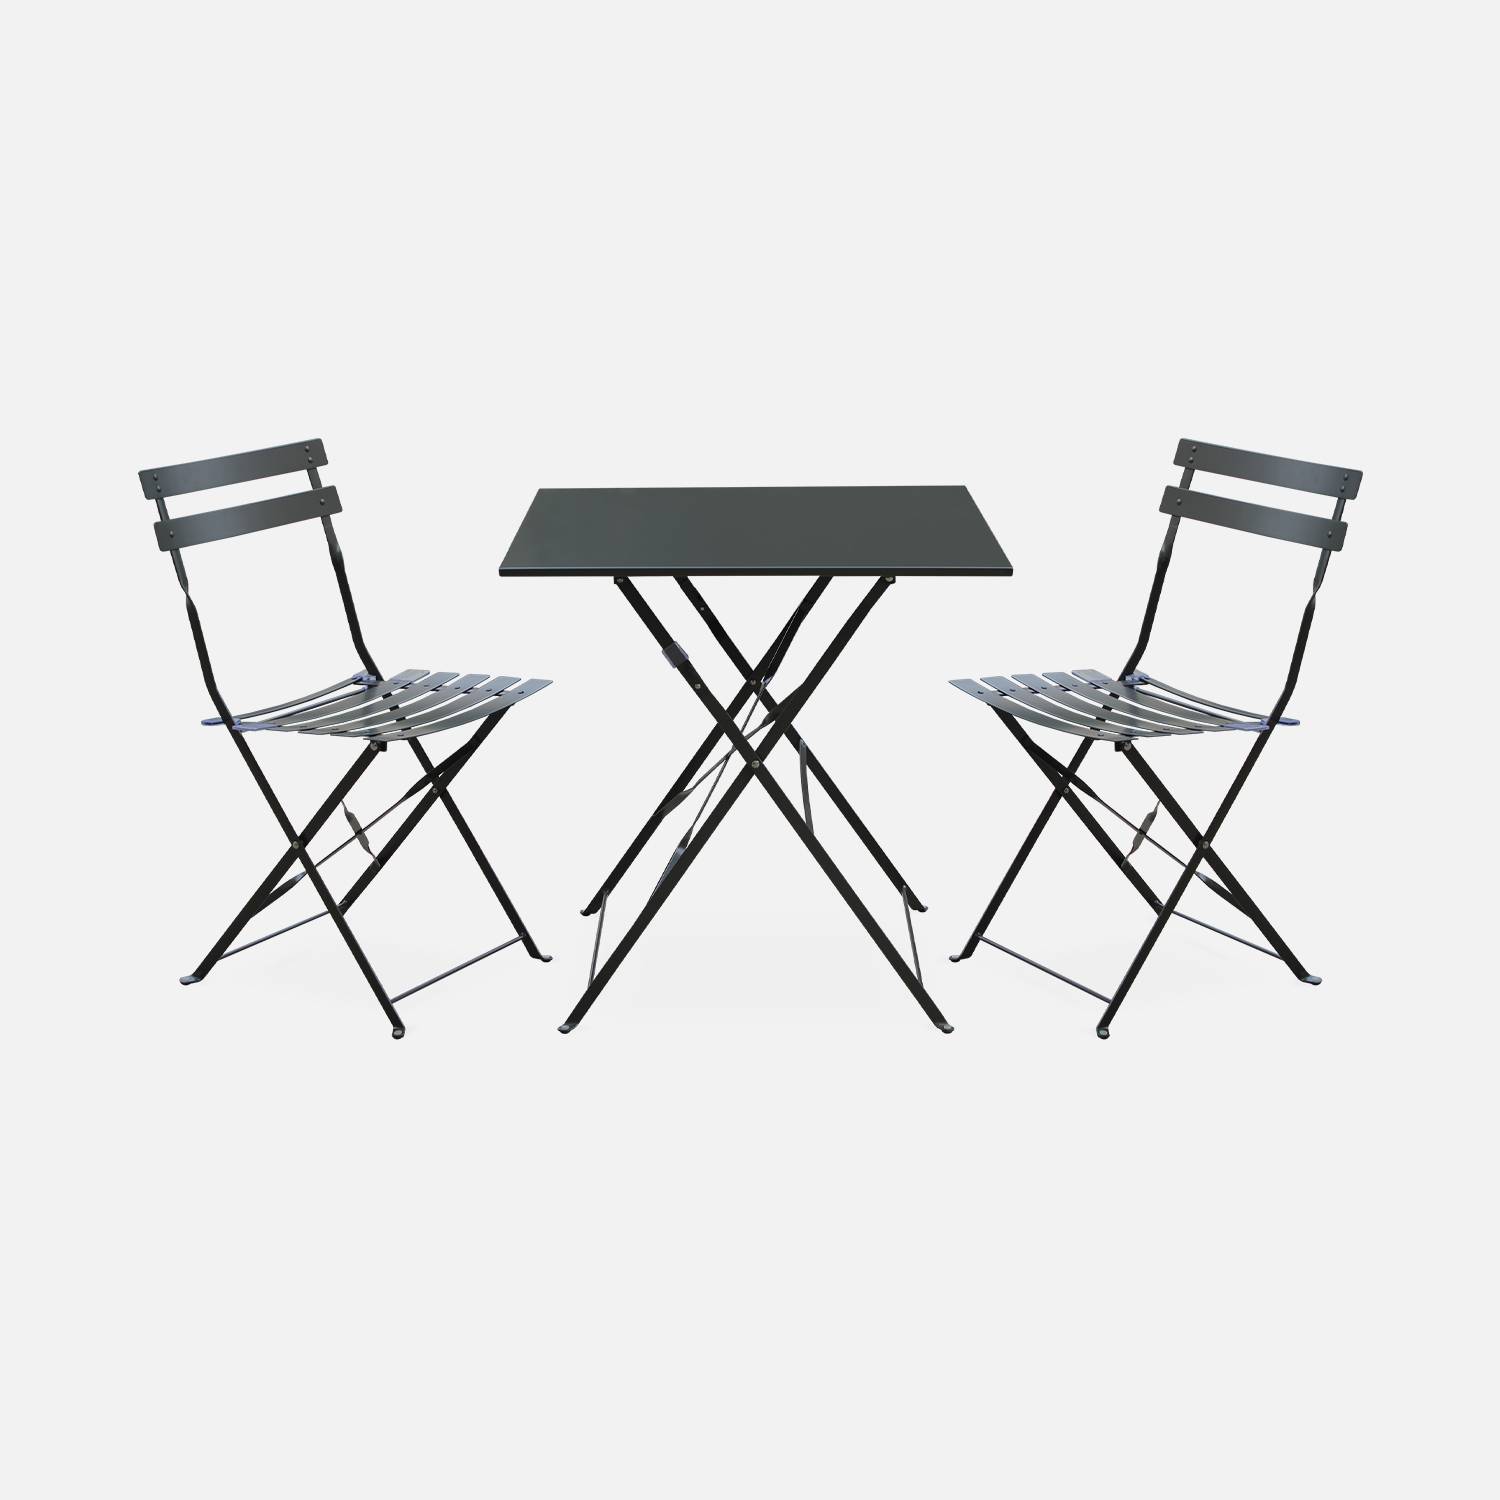 2-seater foldable thermo-lacquered steel bistro garden table with chairs, 70x70cm - Emilia - Anthracite Photo2